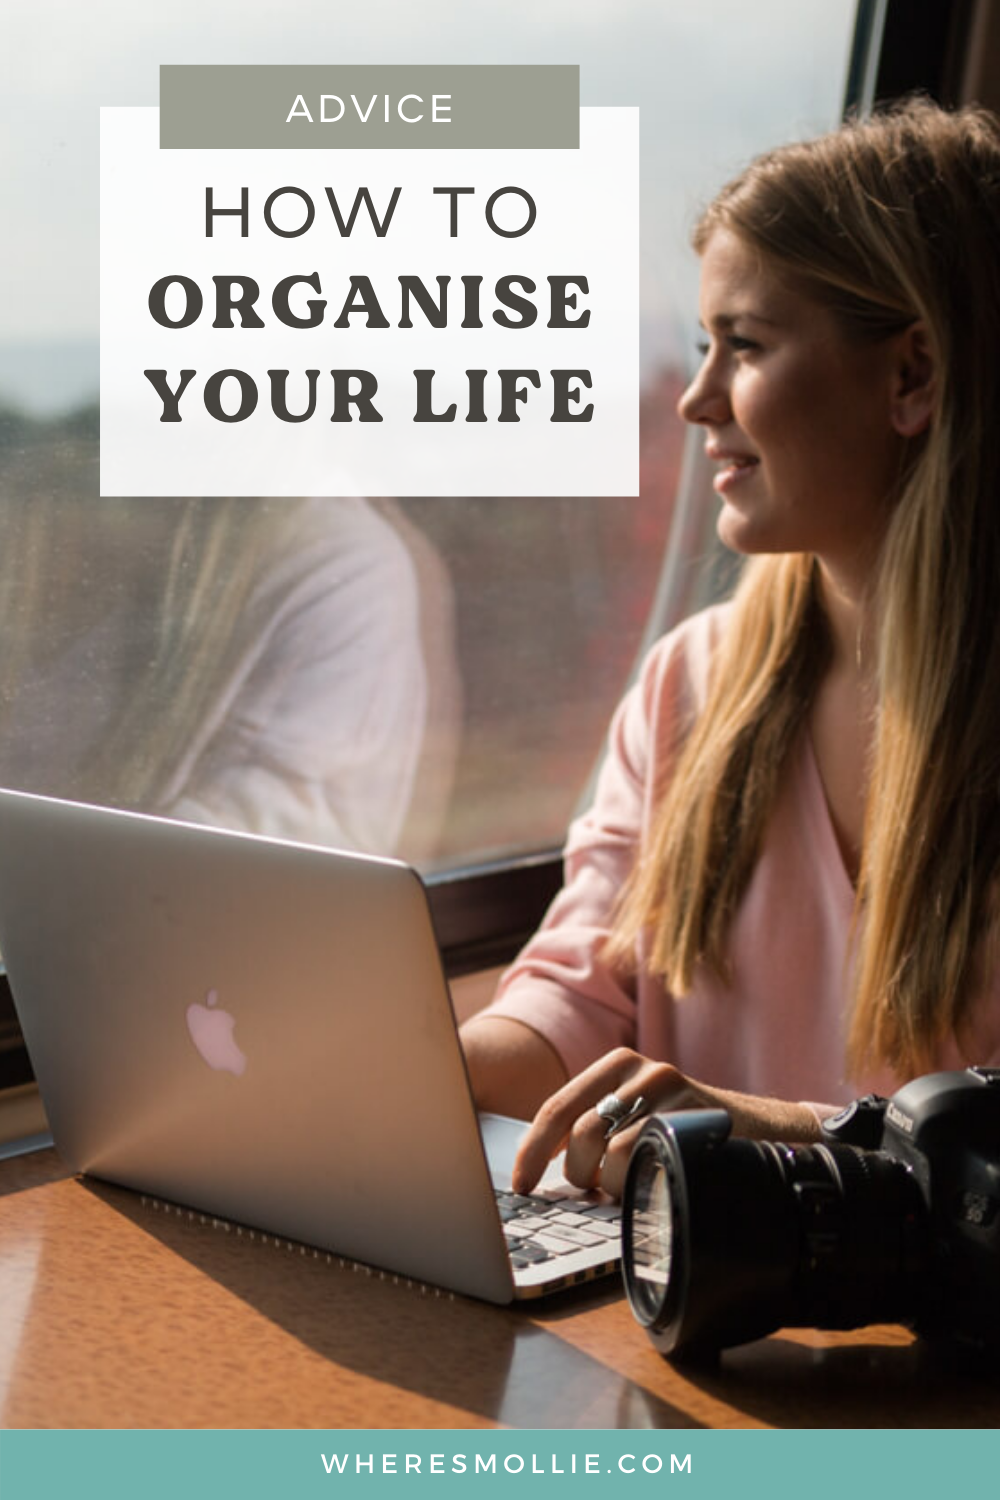 Life hacks: My top 10 tips and apps for organising your life